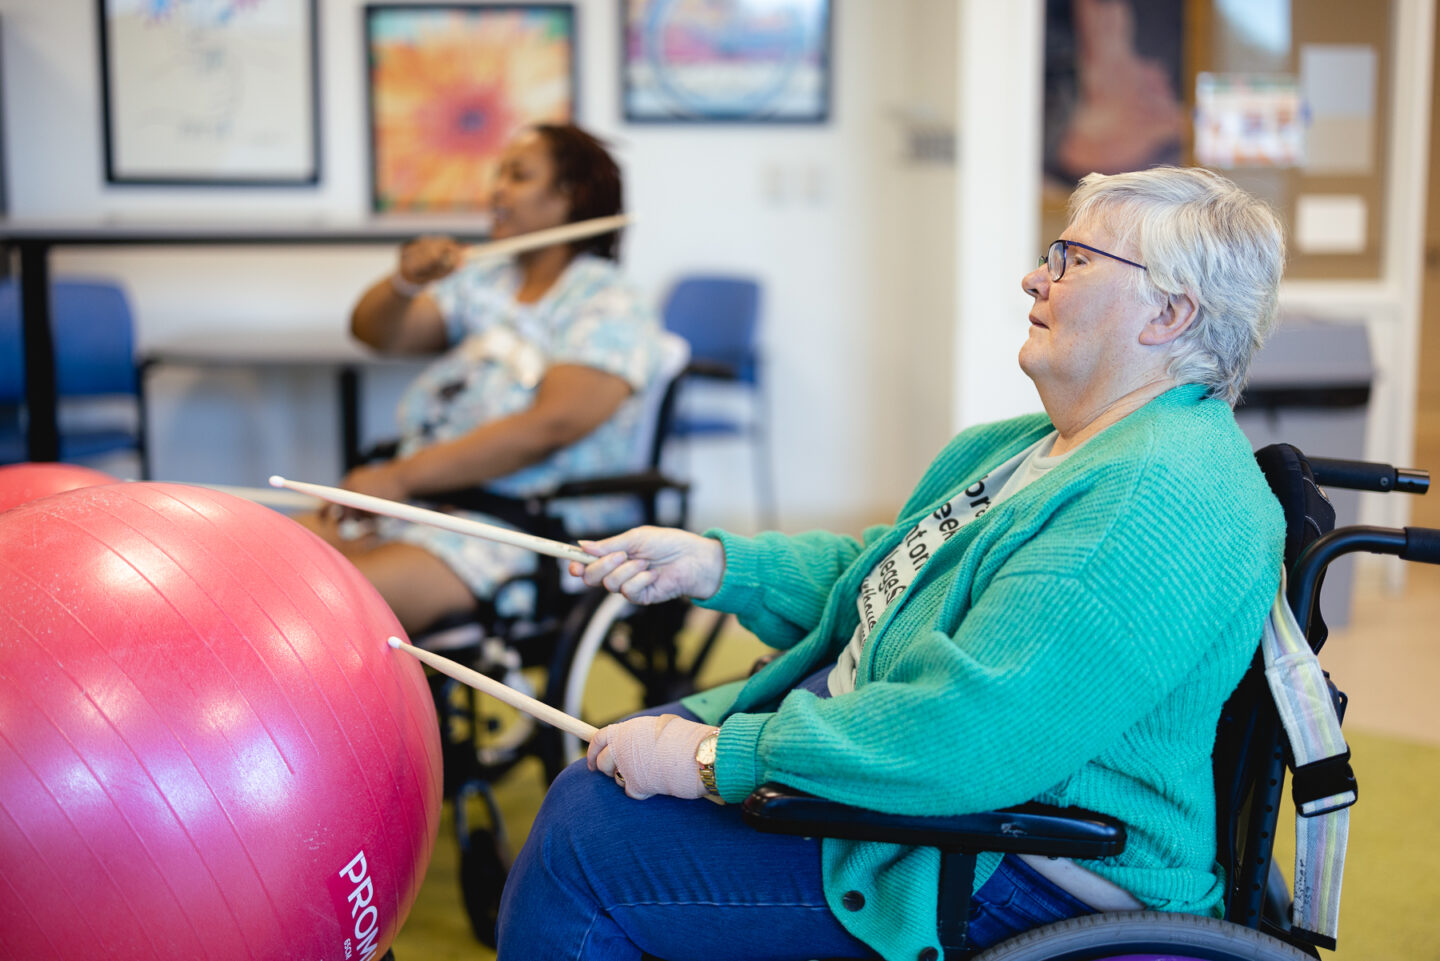 Senior patients participate in a cardio drumming session with exercise balls and drumsticks.